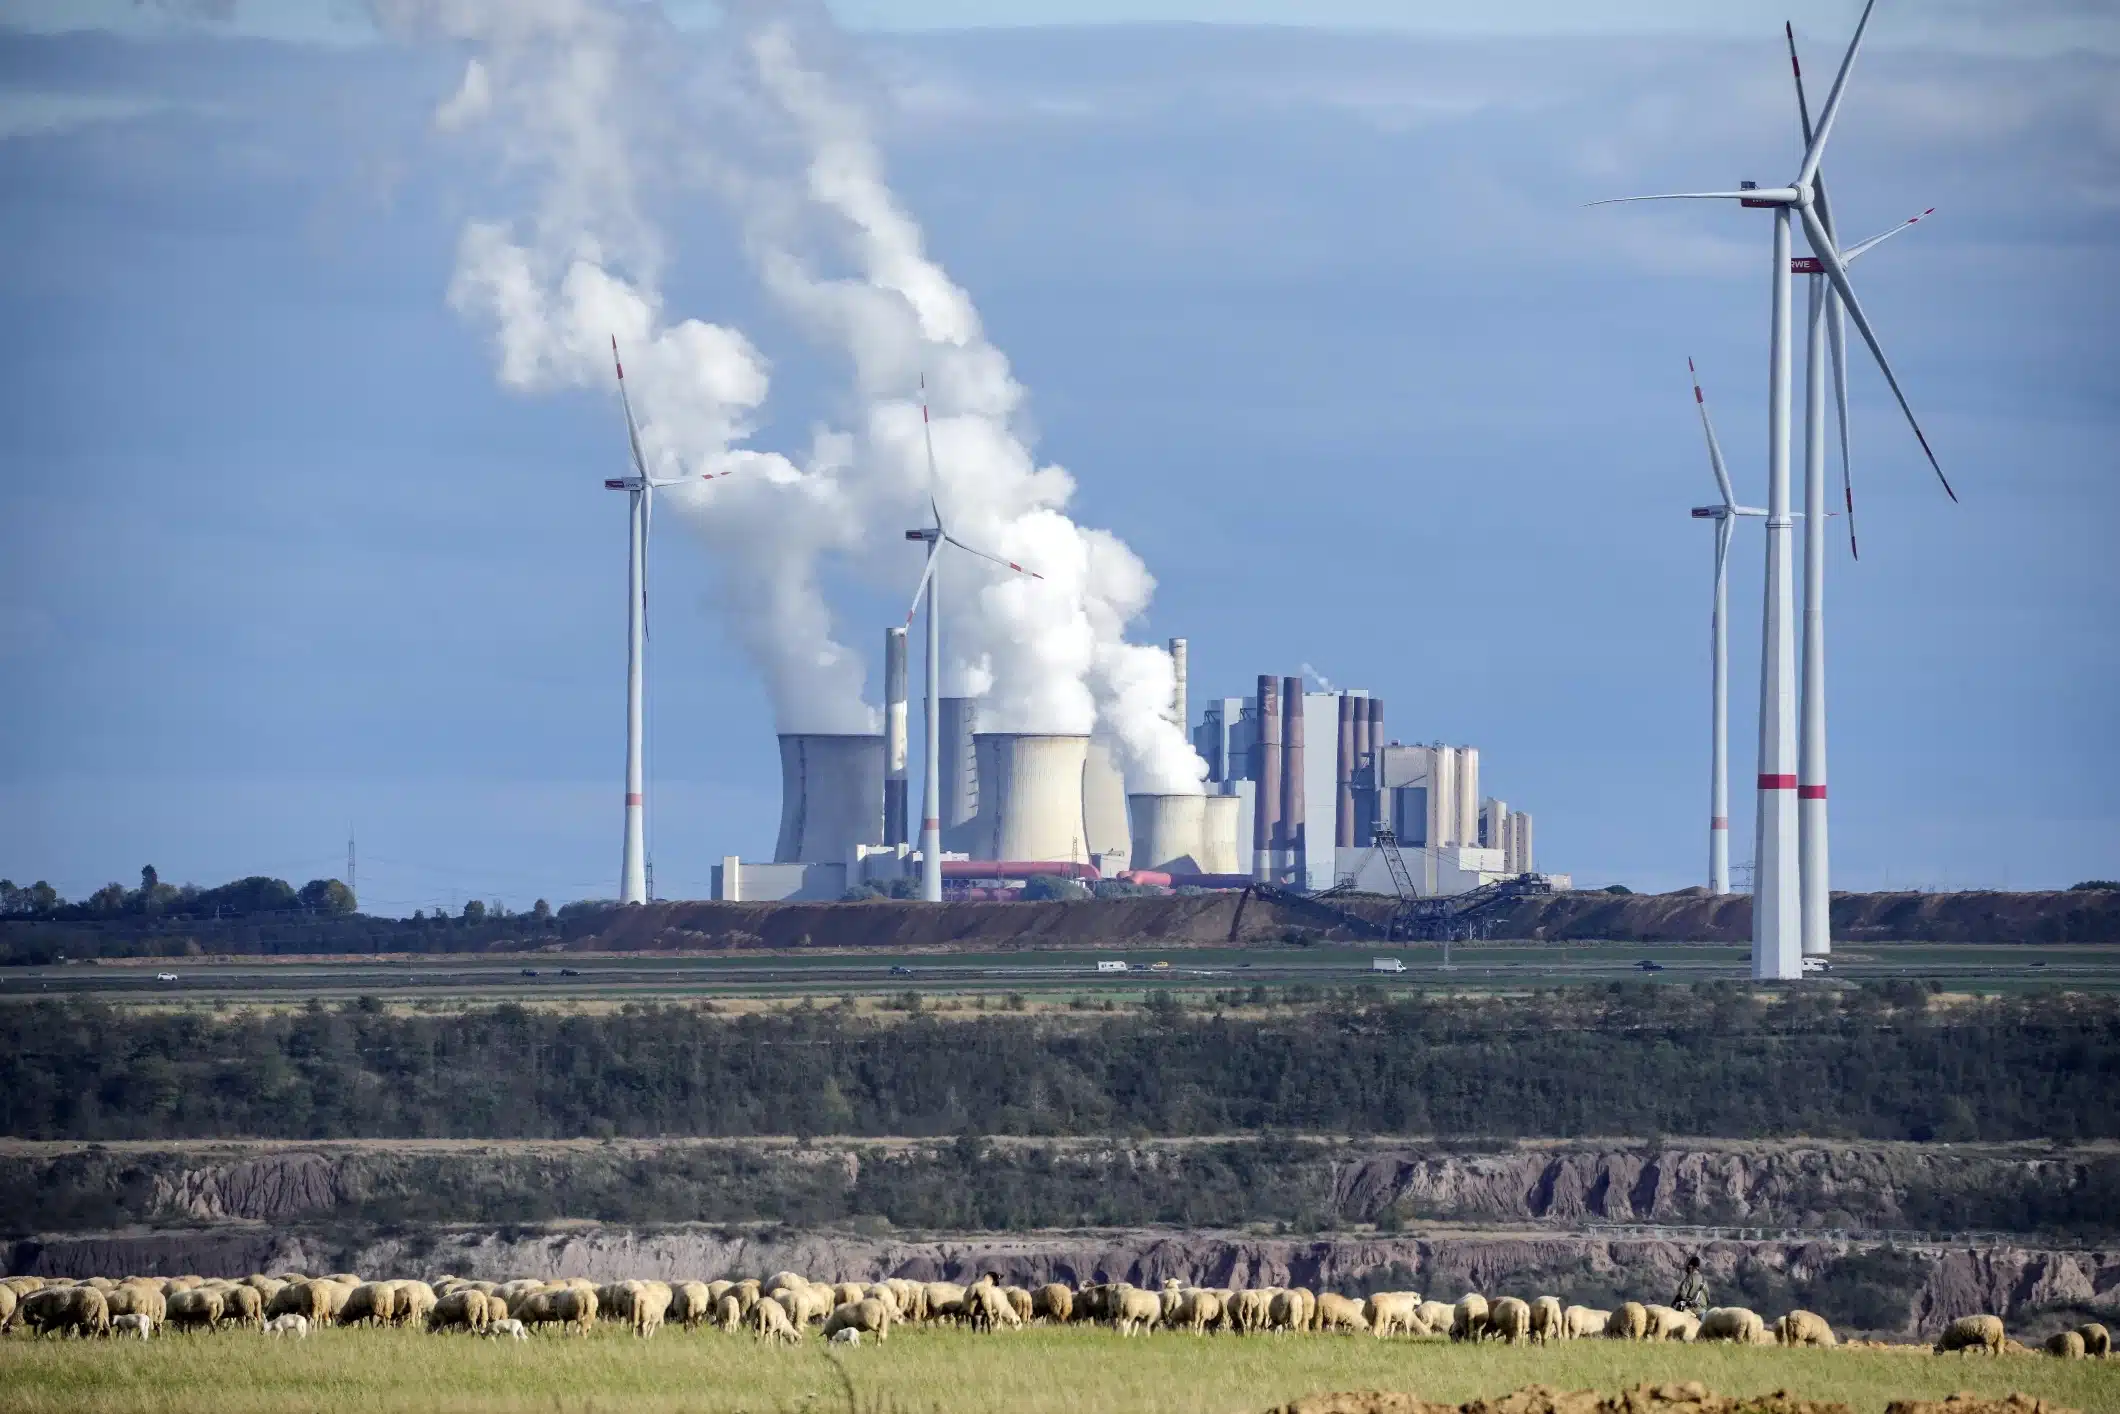 A flock of sheep graze in front of a coal-fired power plant at the Garzweiler open-cast coal mine near Lutzerath, western Germany, Sunday Oct. 16, 2022. The abandoned village of Luetzerath will be the latest village to disappear as coal mining at the Garzweiler mine expands.